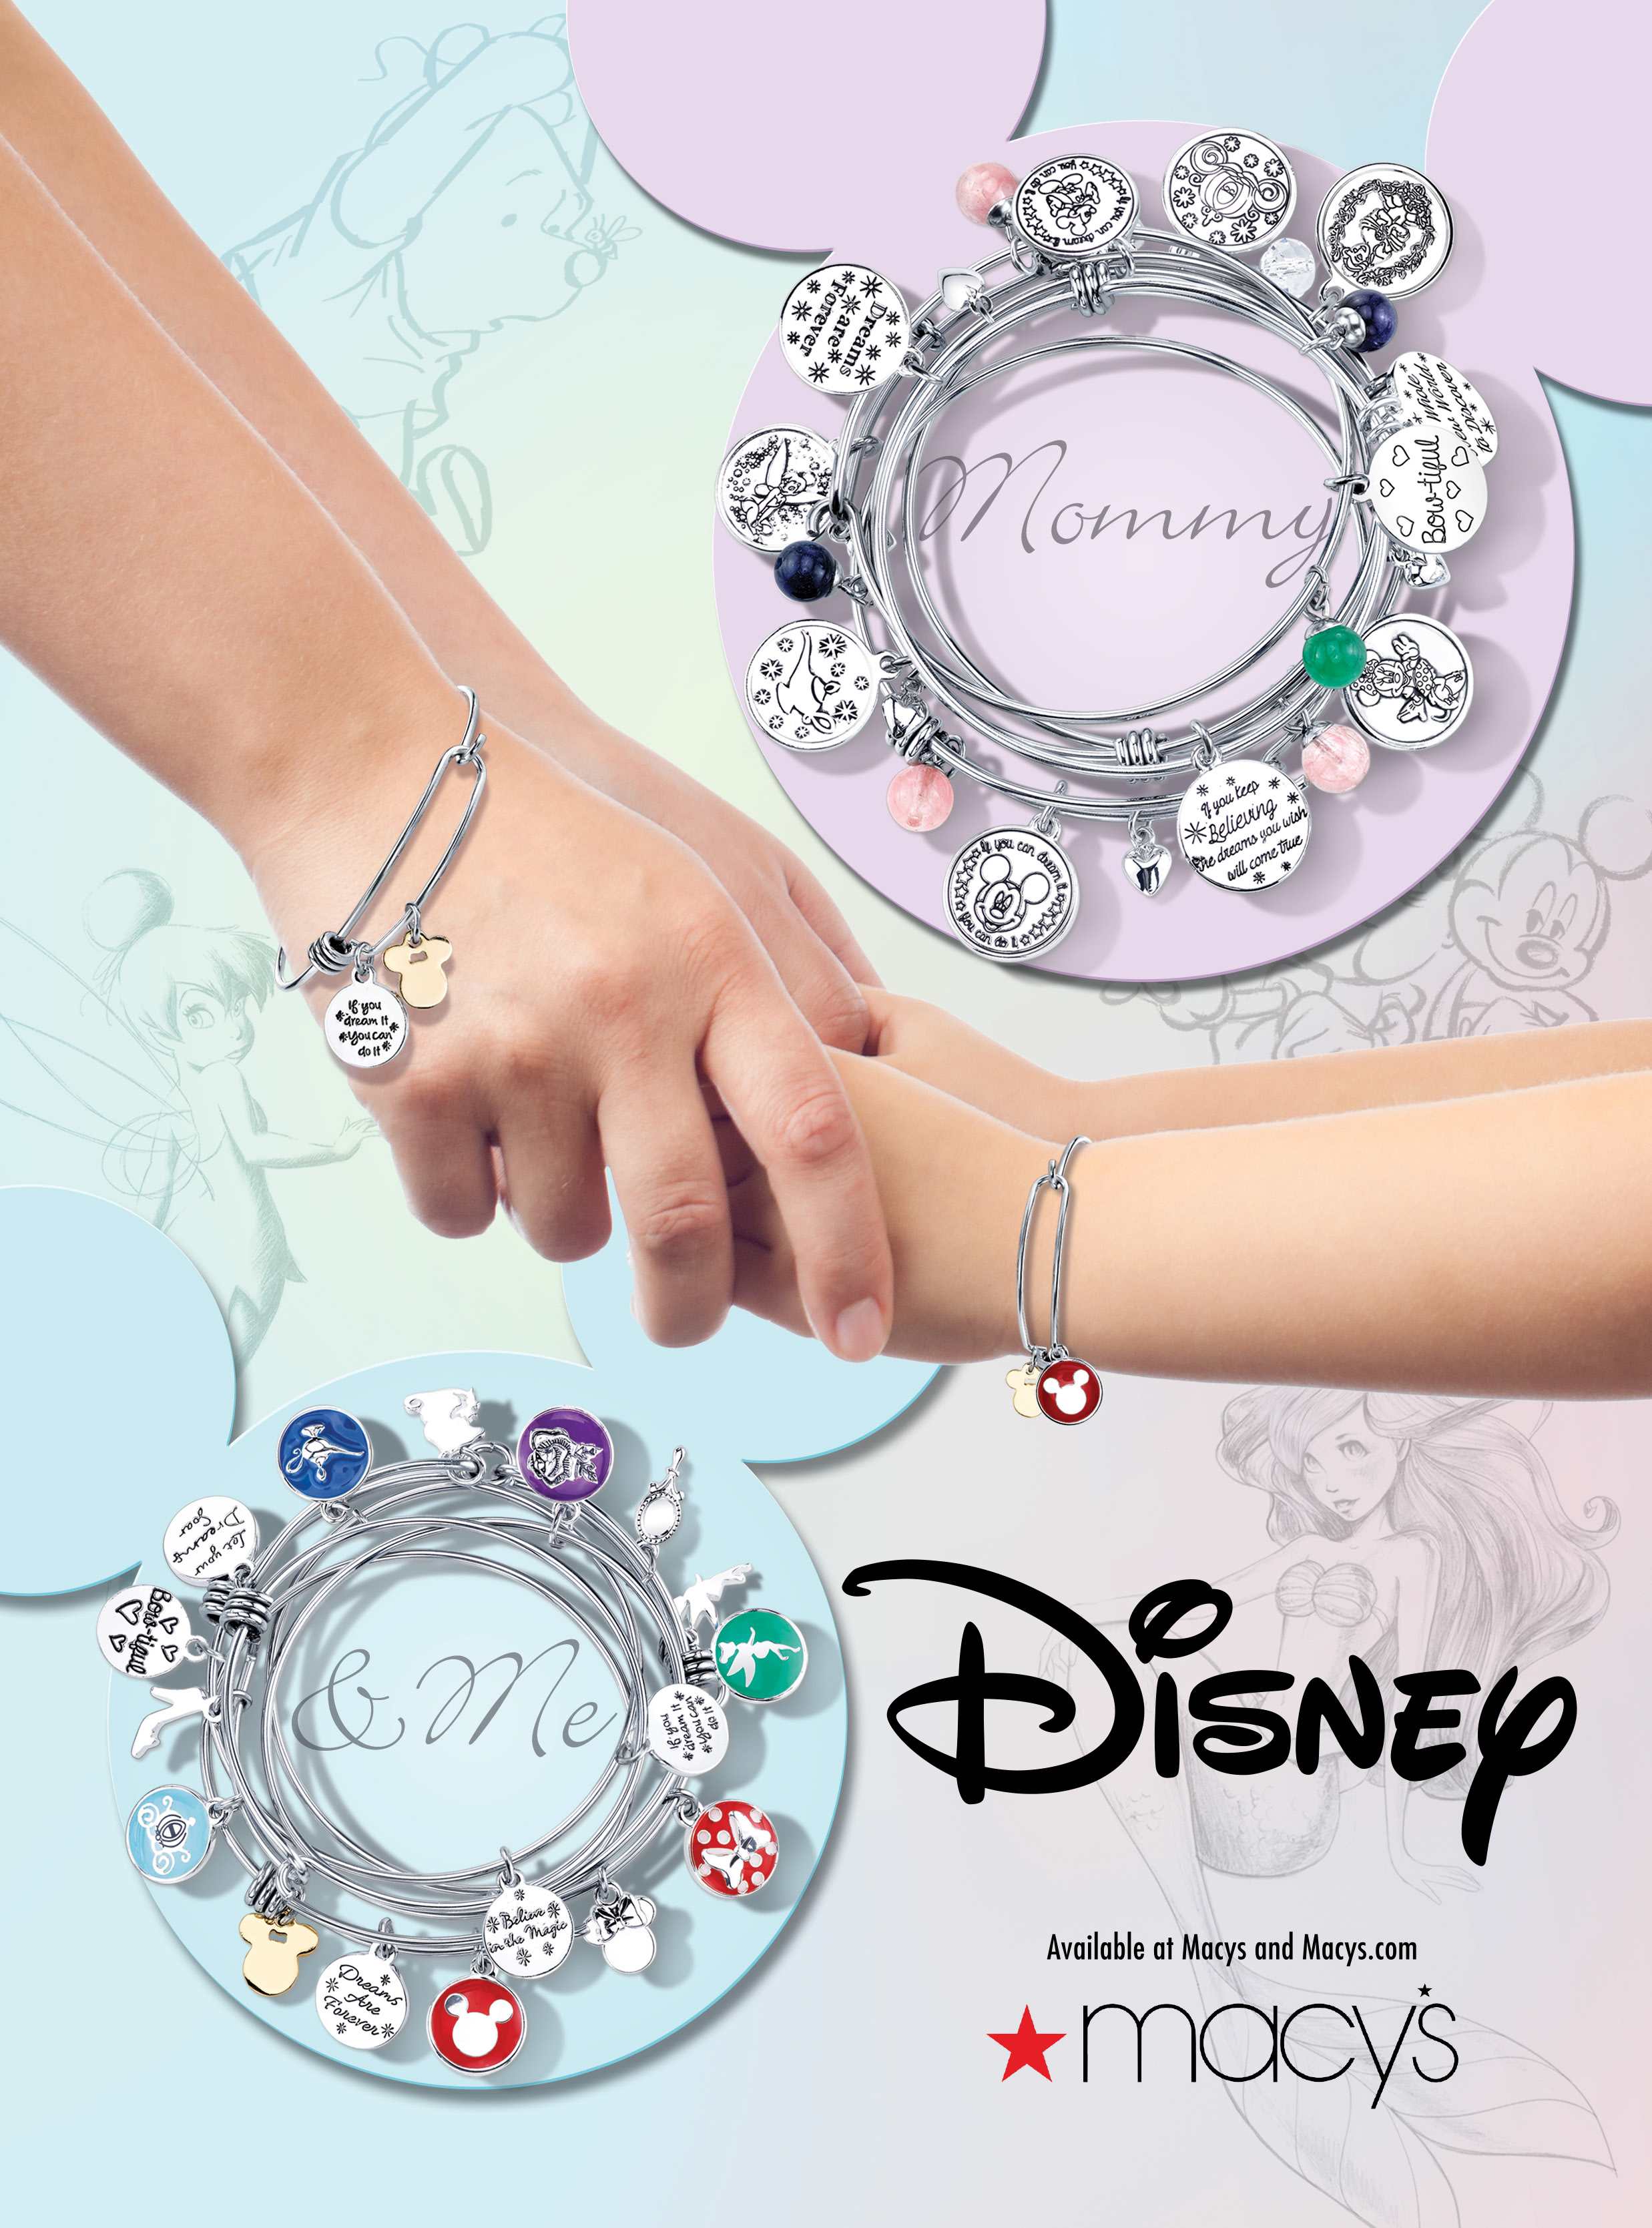 magazine ad, print ad, mommy and me ad, ad, disney, pastel, instyle, jewelry ad, creative jewelry ad